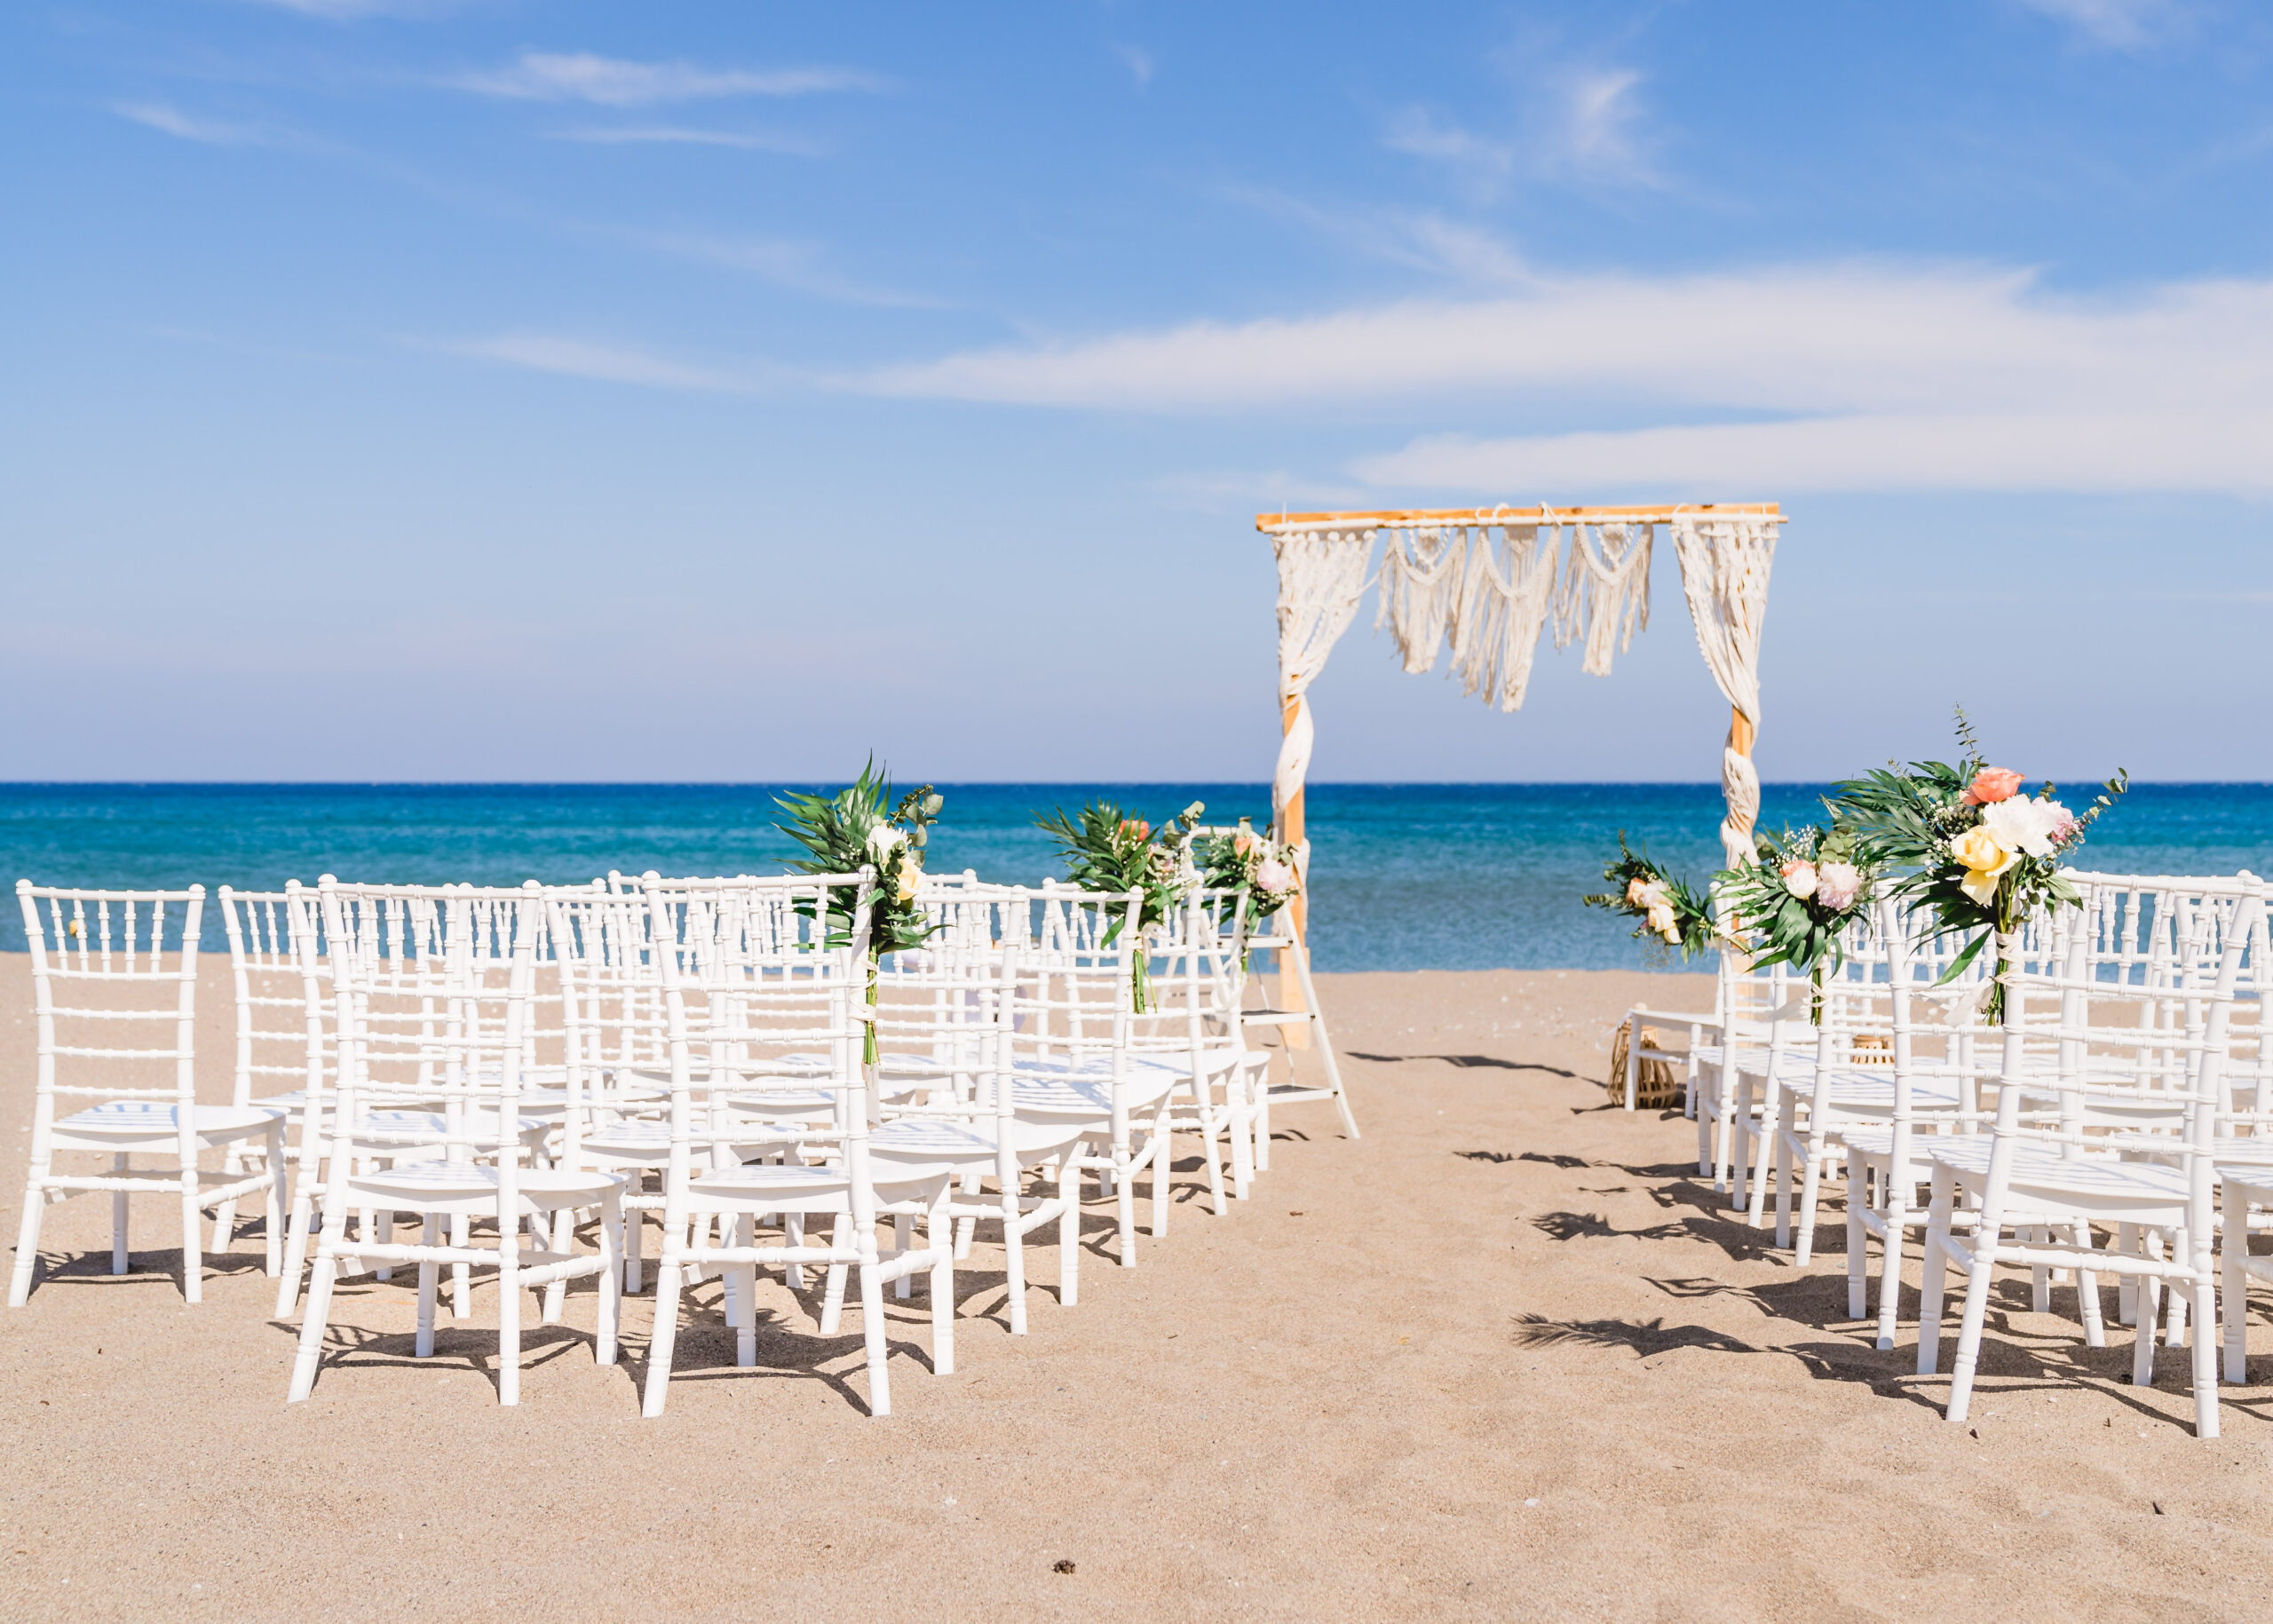 Experience magic moments with our wedding planner in Rhodes! Let us make your dream wedding come true - unforgettable & stress-free. Inquire now!